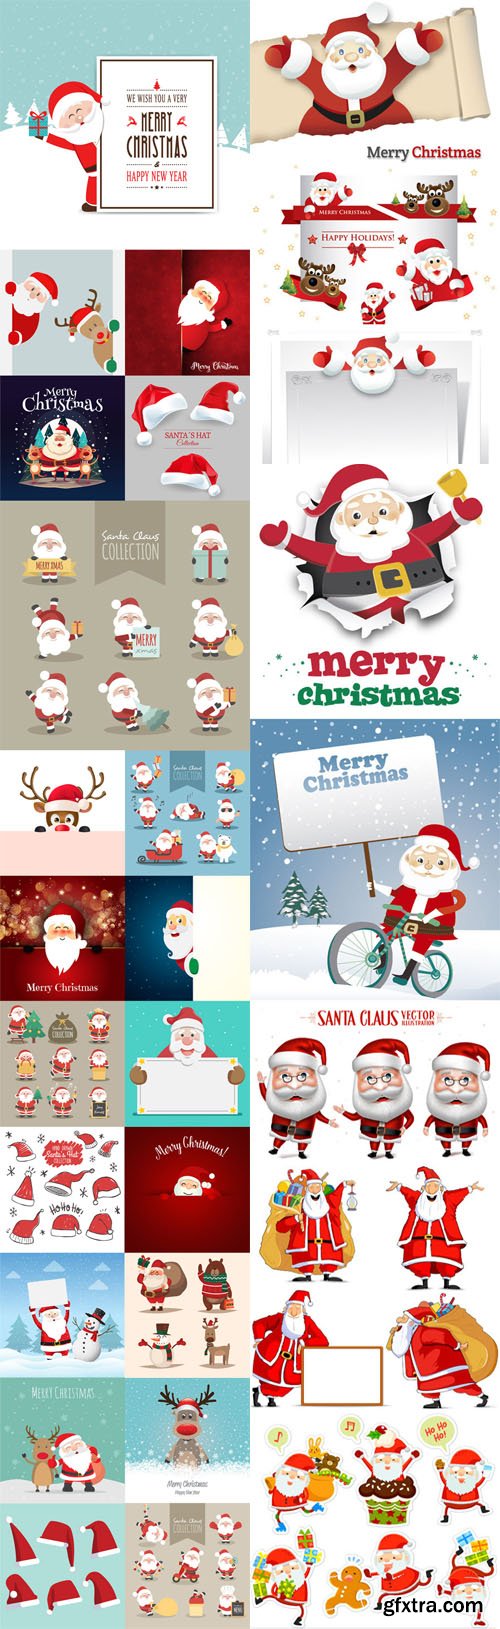 Santa Claus Characters Vector Collection 1